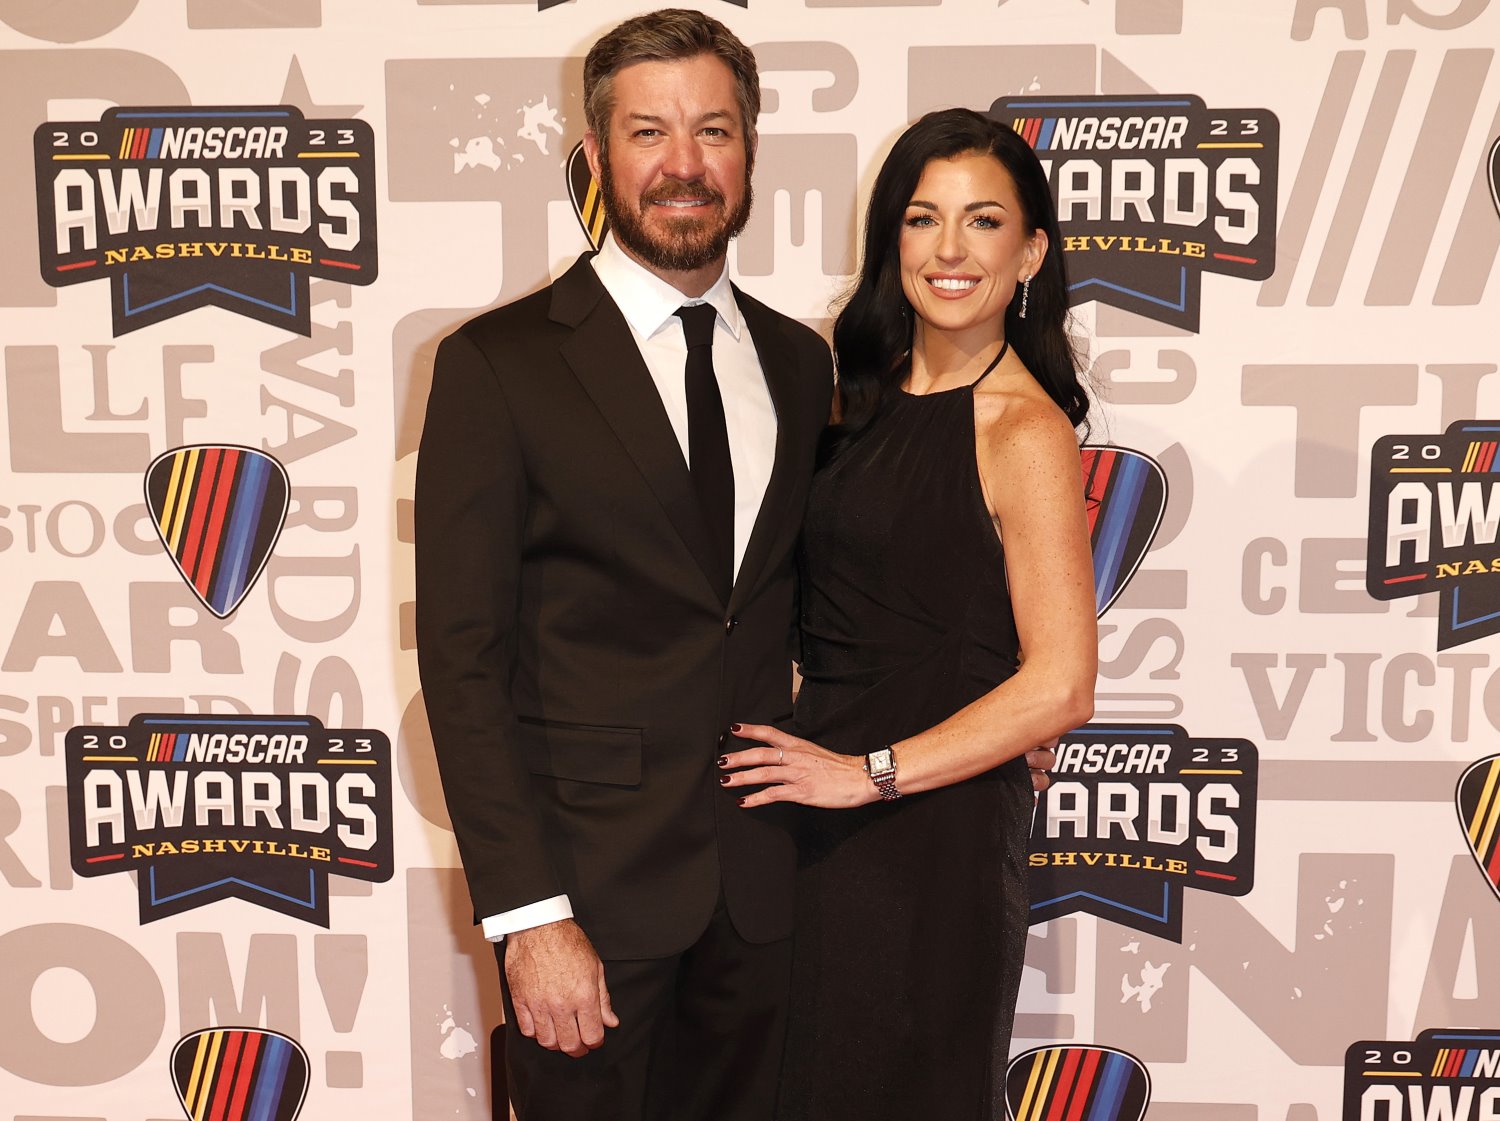 NASCAR Cup Series driver, Martin Truex Jr. and Emily Collins pose for photos on the red carpet prior to the NASCAR Awards and Champion Celebration at the Music City Center on November 30, 2023 in Nashville, Tennessee. (Photo by Chris Graythen/Getty Images)